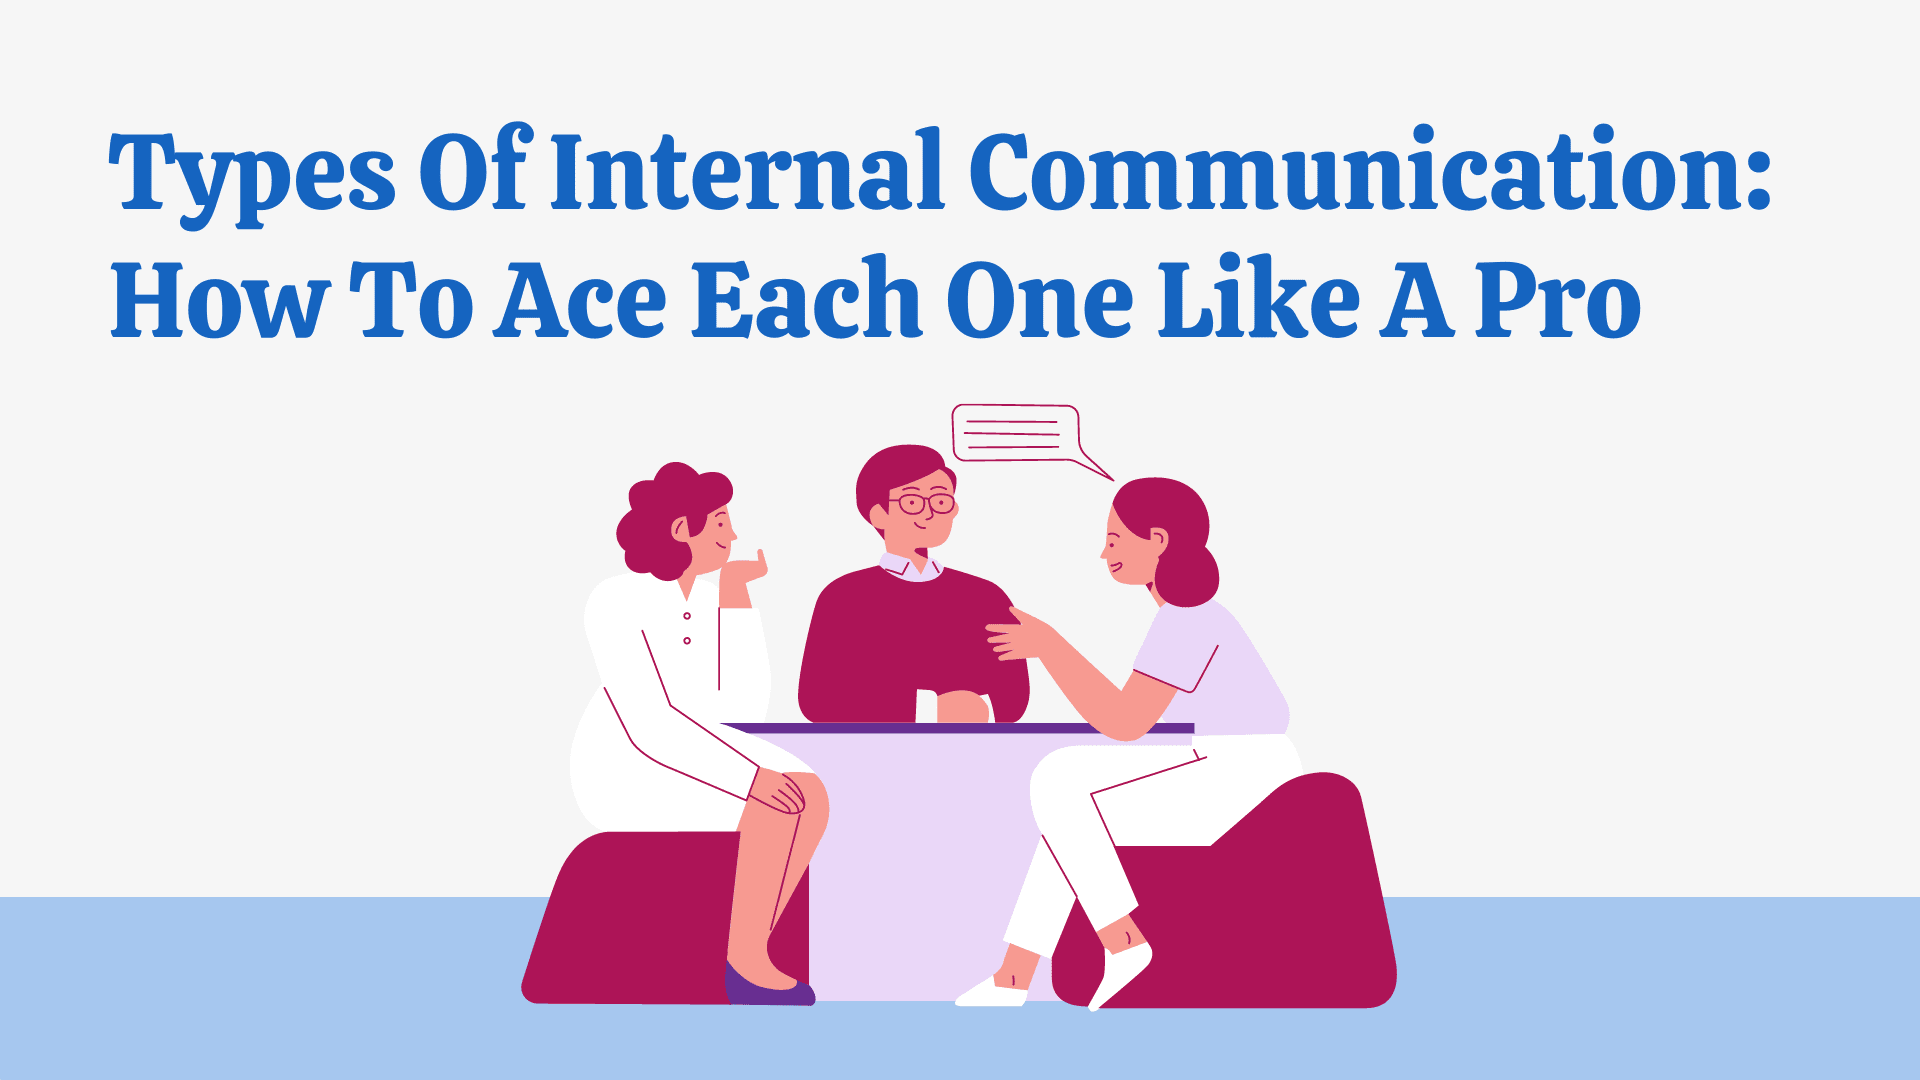 6 Types Of Internal Communication: How To Ace Each One Like A Pro